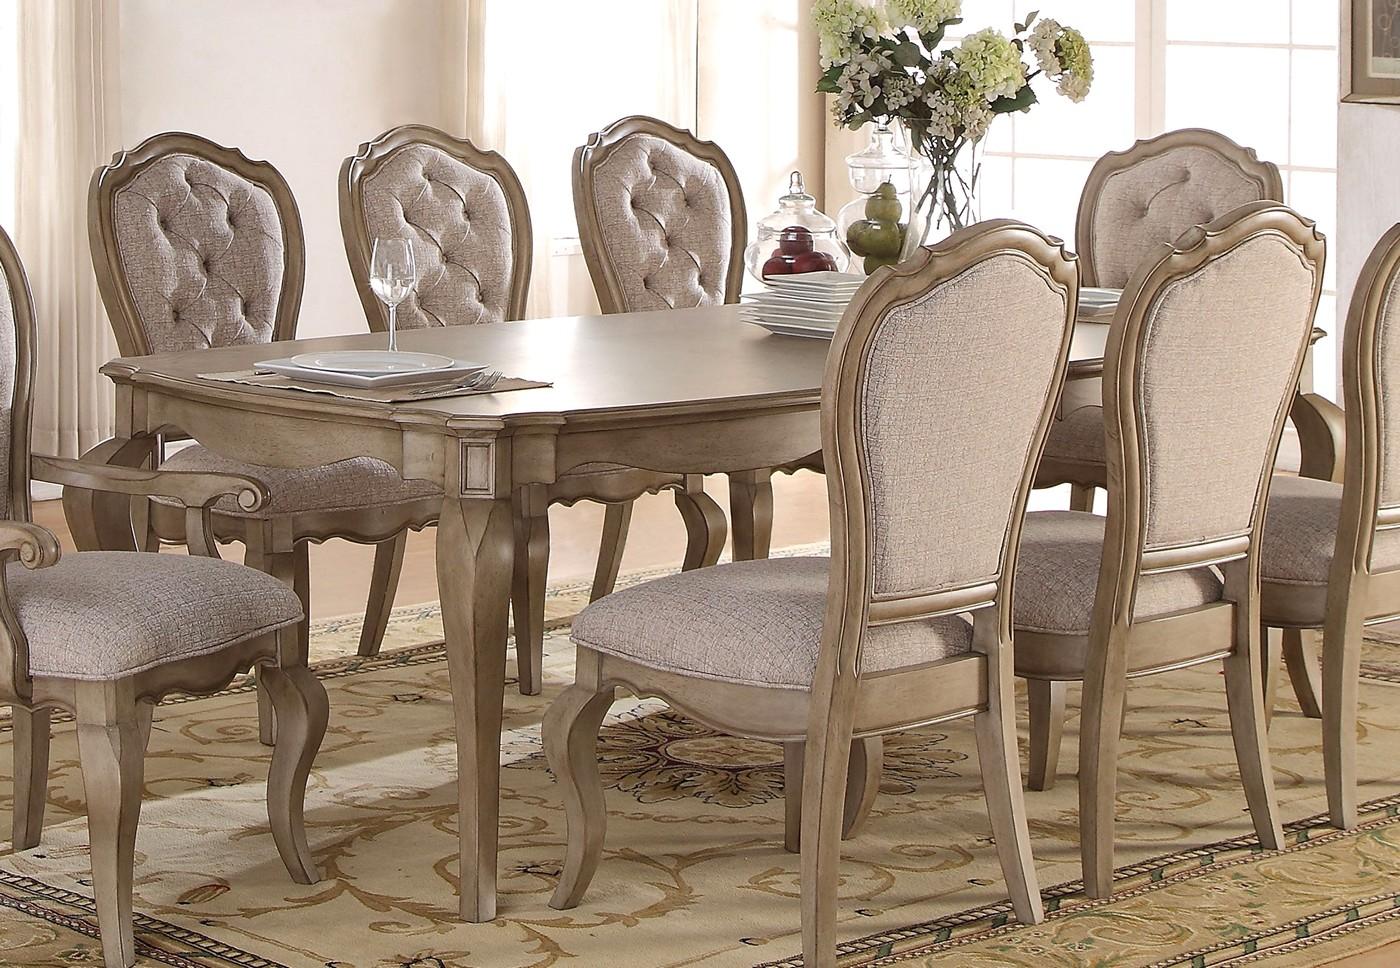 Classic, Traditional Dining Table Set Chelmsford 66050 66050 Chelmsford- Set-7 in Taupe Fabric